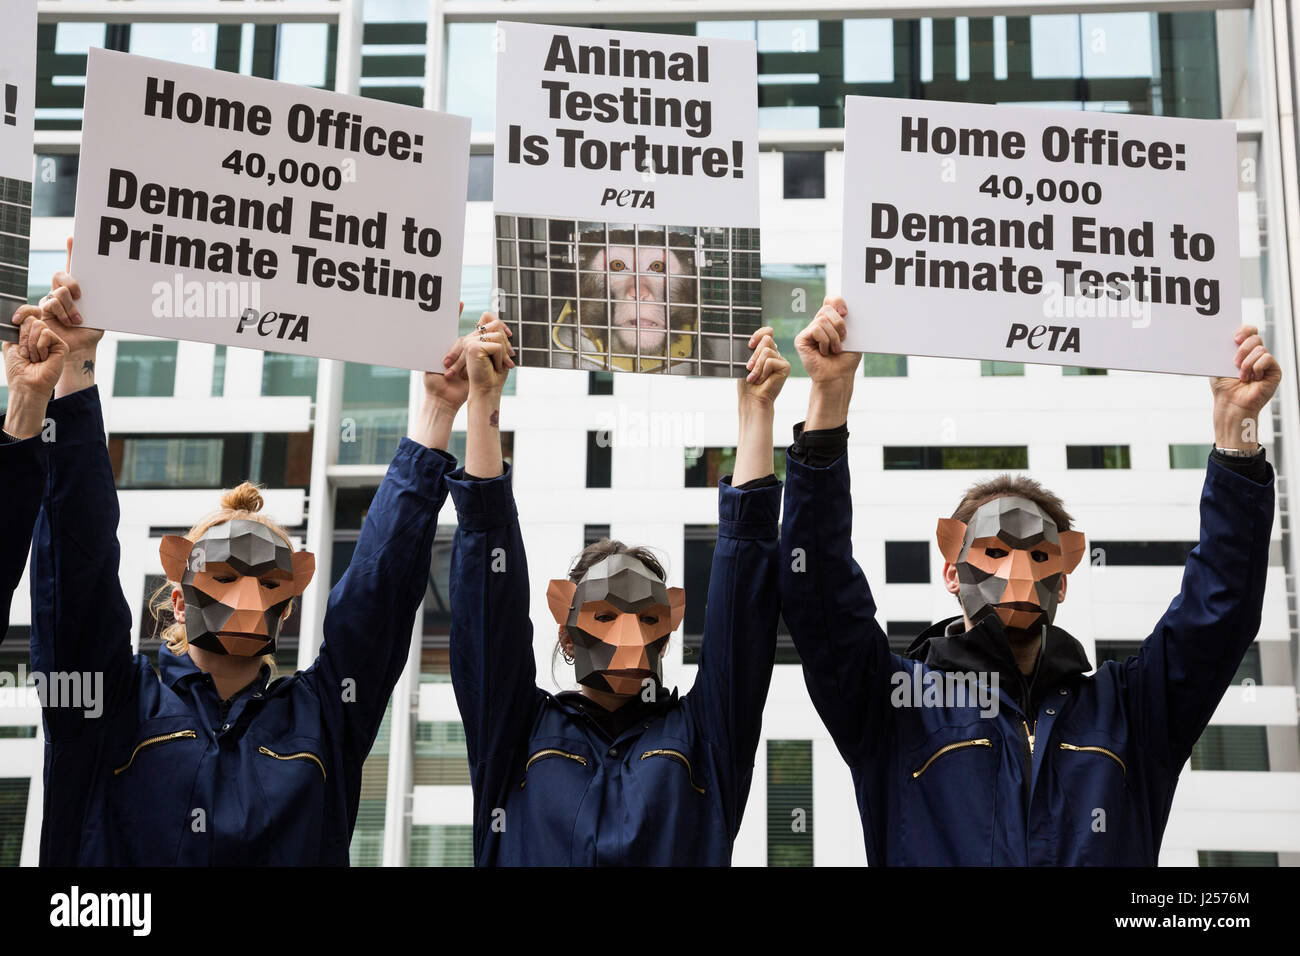 London, UK. 24 April 2017. To mark World Day for Animals in Laboratories, PETA members gathered outside the Home Office wearing monkey masks to protest experimenters' attempts to change the category of suffering assigned to neurological experiments on primates from 'severe' to 'moderate'. A letter with more than 40,000 signatures was delivered to the Home Office calling on the government not only to reject attempts to downgrade severity classification but also to end these cruel experiments altogether. Stock Photo